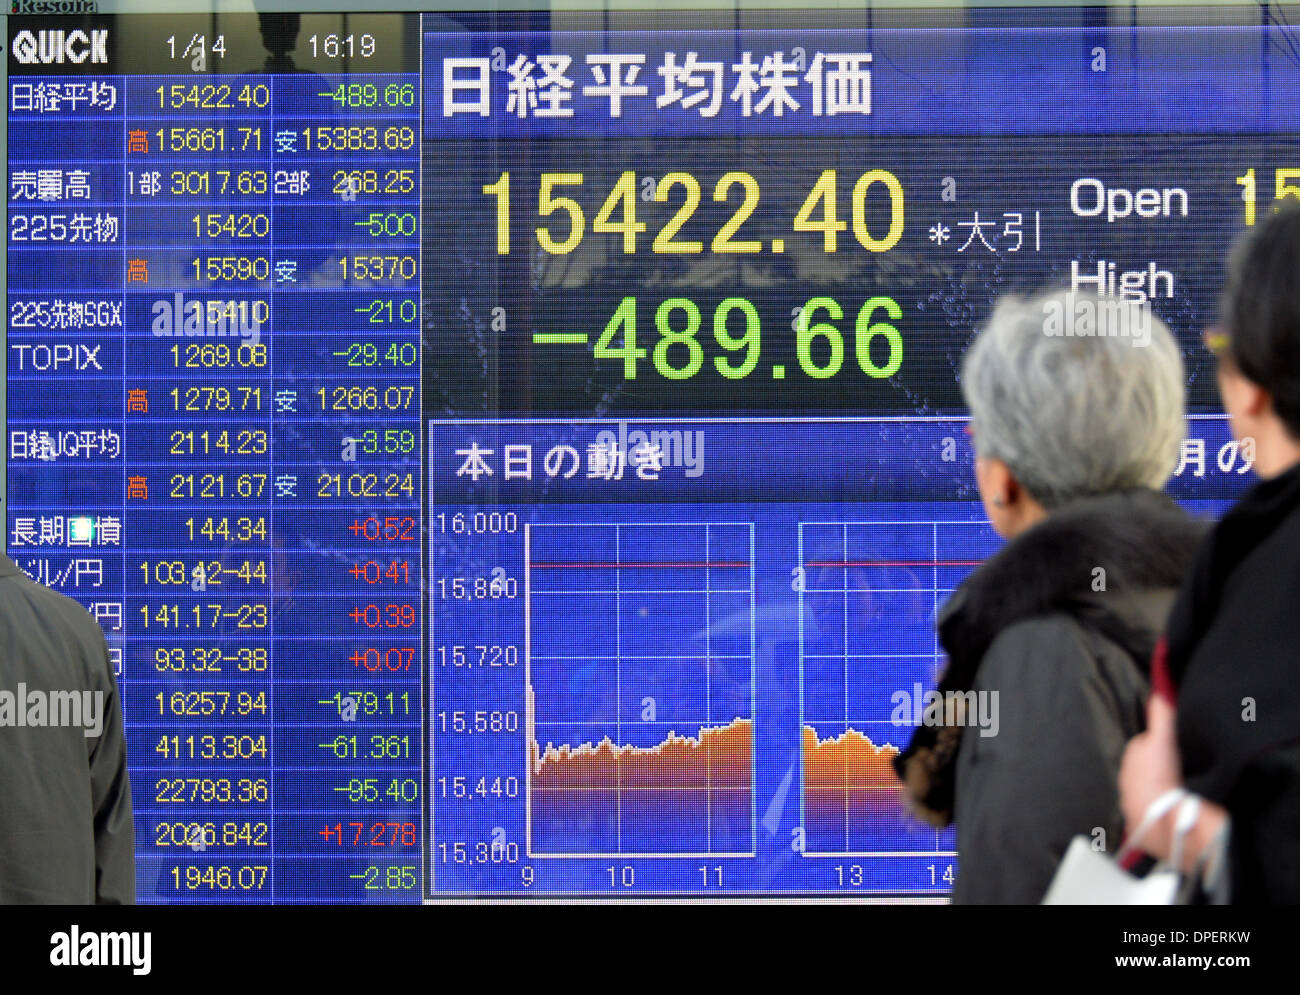 Tokyo, Japan. 14th Jan, 2014. Pedestrians examine the stock prices on the bulletin board as Tokyo stocks closed sharply lower Tuesday, January 14, 2014. The Nikkei Stock Average dipped to 15,422.40 at the close of Tuesday's trading on the Tokyo Stock Exchange market, marking the biggest one-day slip since August 7 last year. Credit:  Natsuki Sakai/AFLO/Alamy Live News Stock Photo